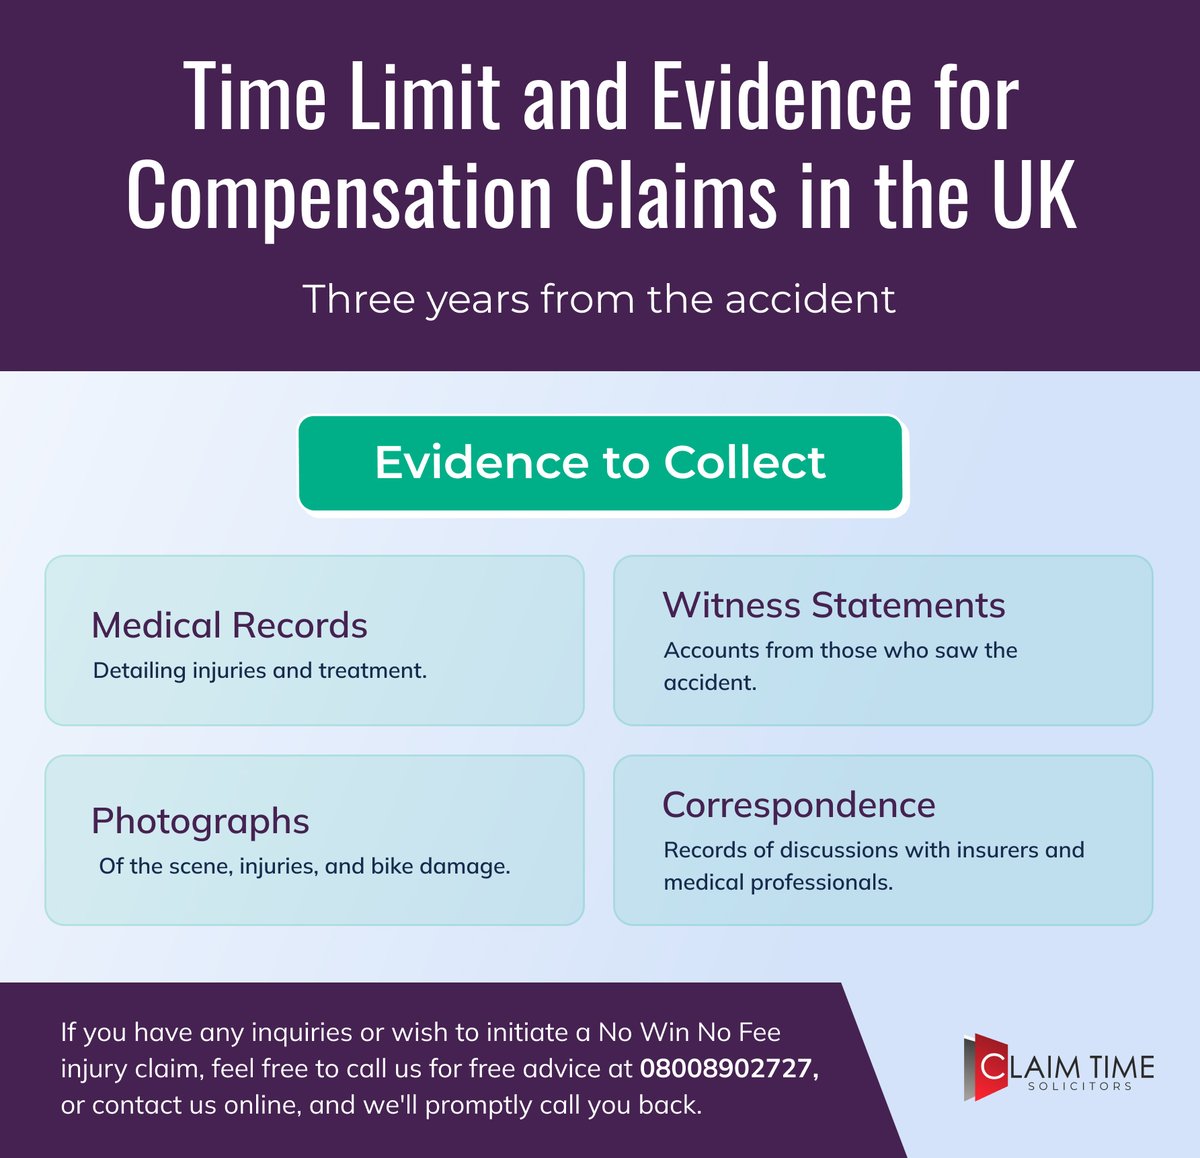 Discover the crucial time limits and essential evidence required for successful compensation claims in the UK. Get informed to protect your rights. #UKCompensation #LegalAdvice #Evidence #TimeLimit #ClaimProcess
Read more: claimtime.com